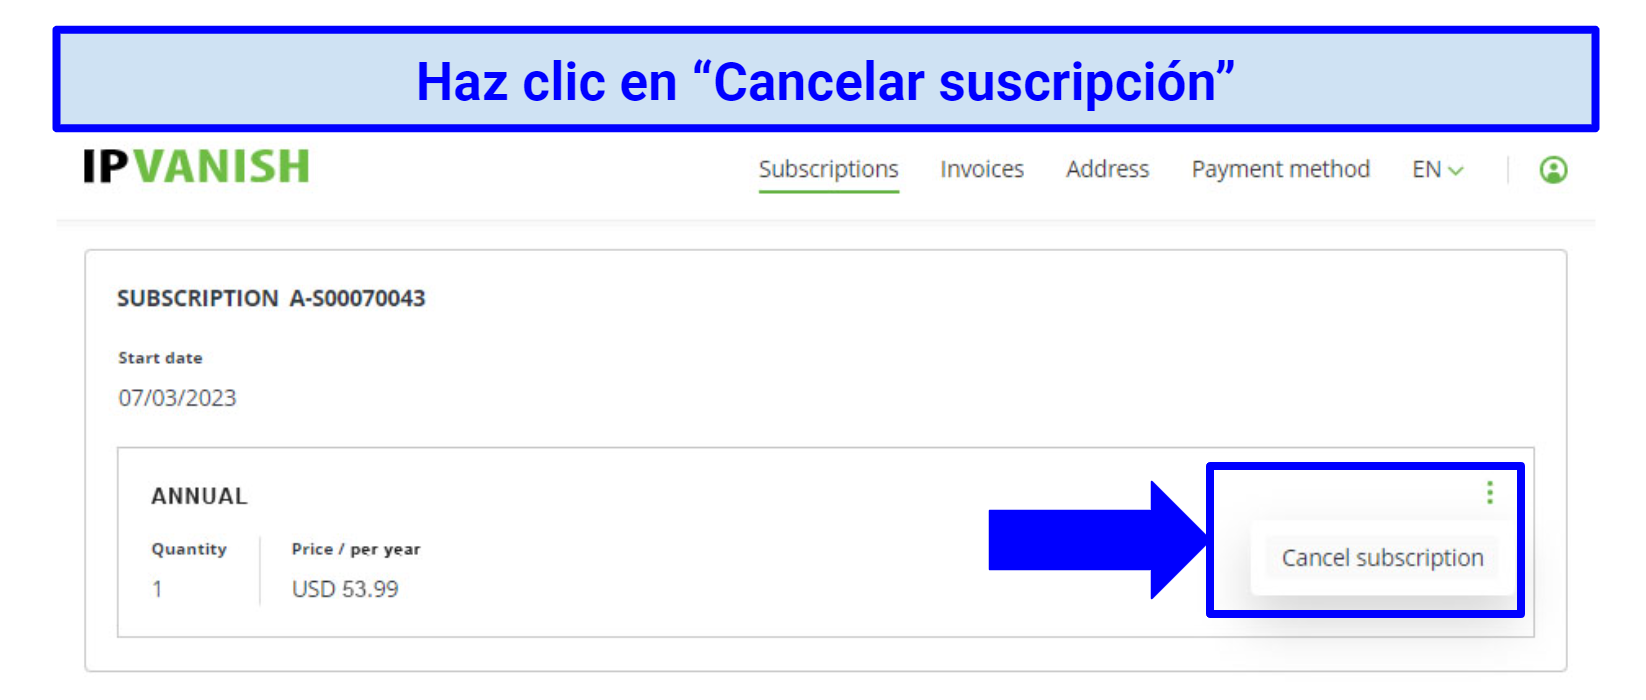 Screenshot showing the IPVanish subscriptions page and how to cancel your subscription